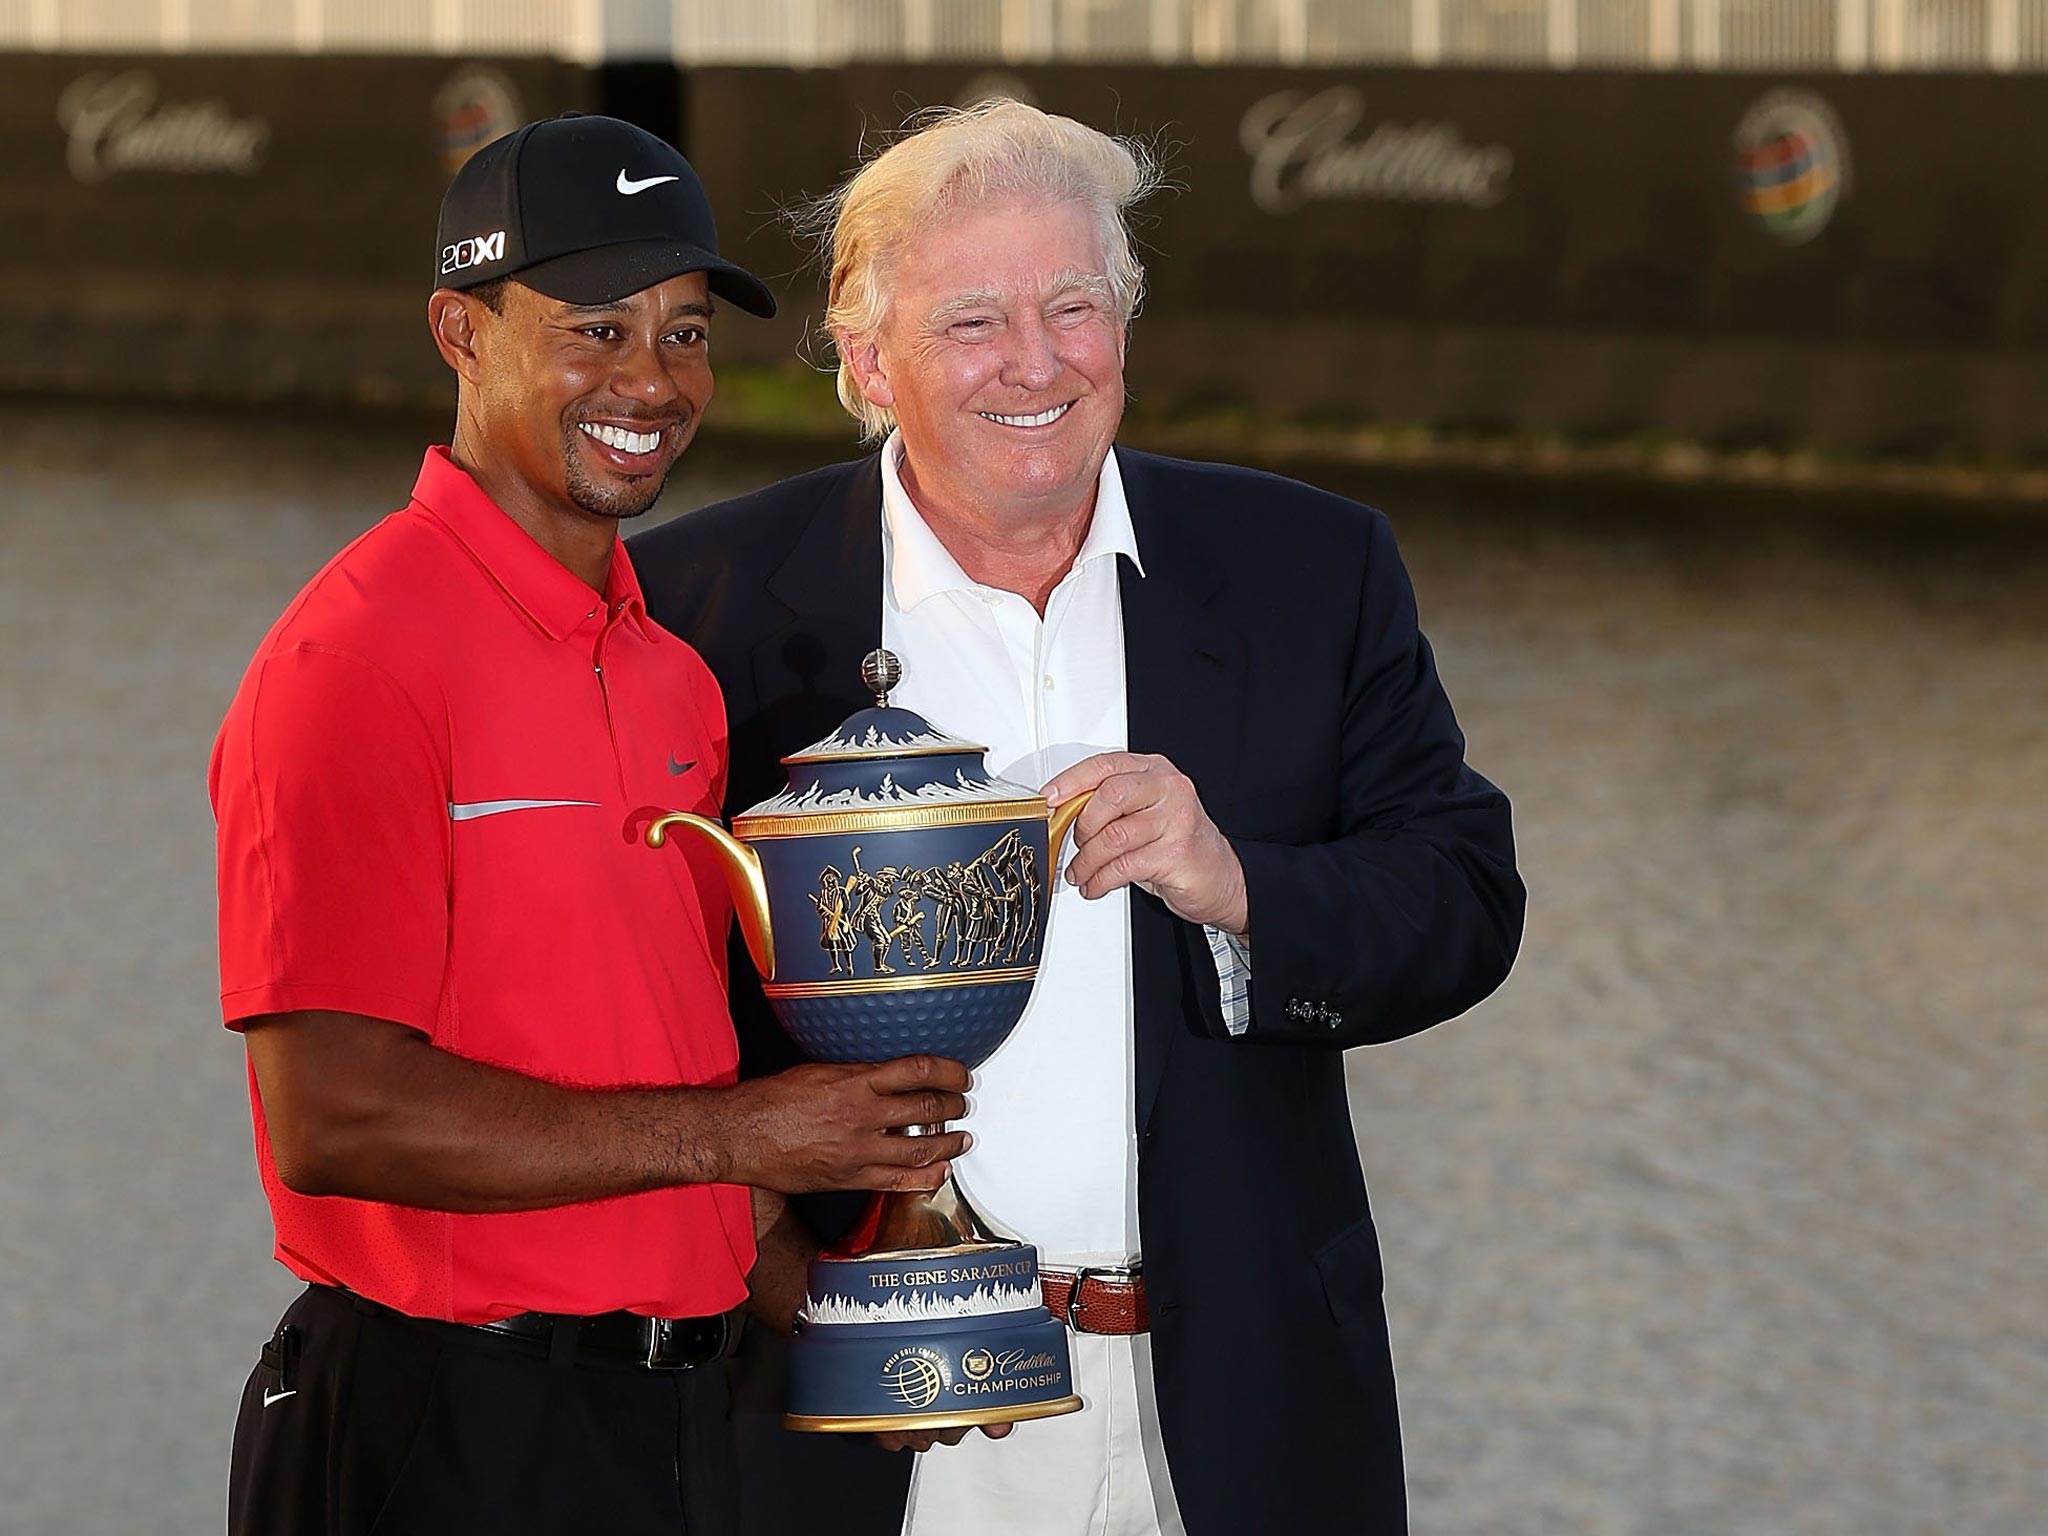 Donald Trump poses with Tiger Woods at Trump National Doral Miami Resort last year